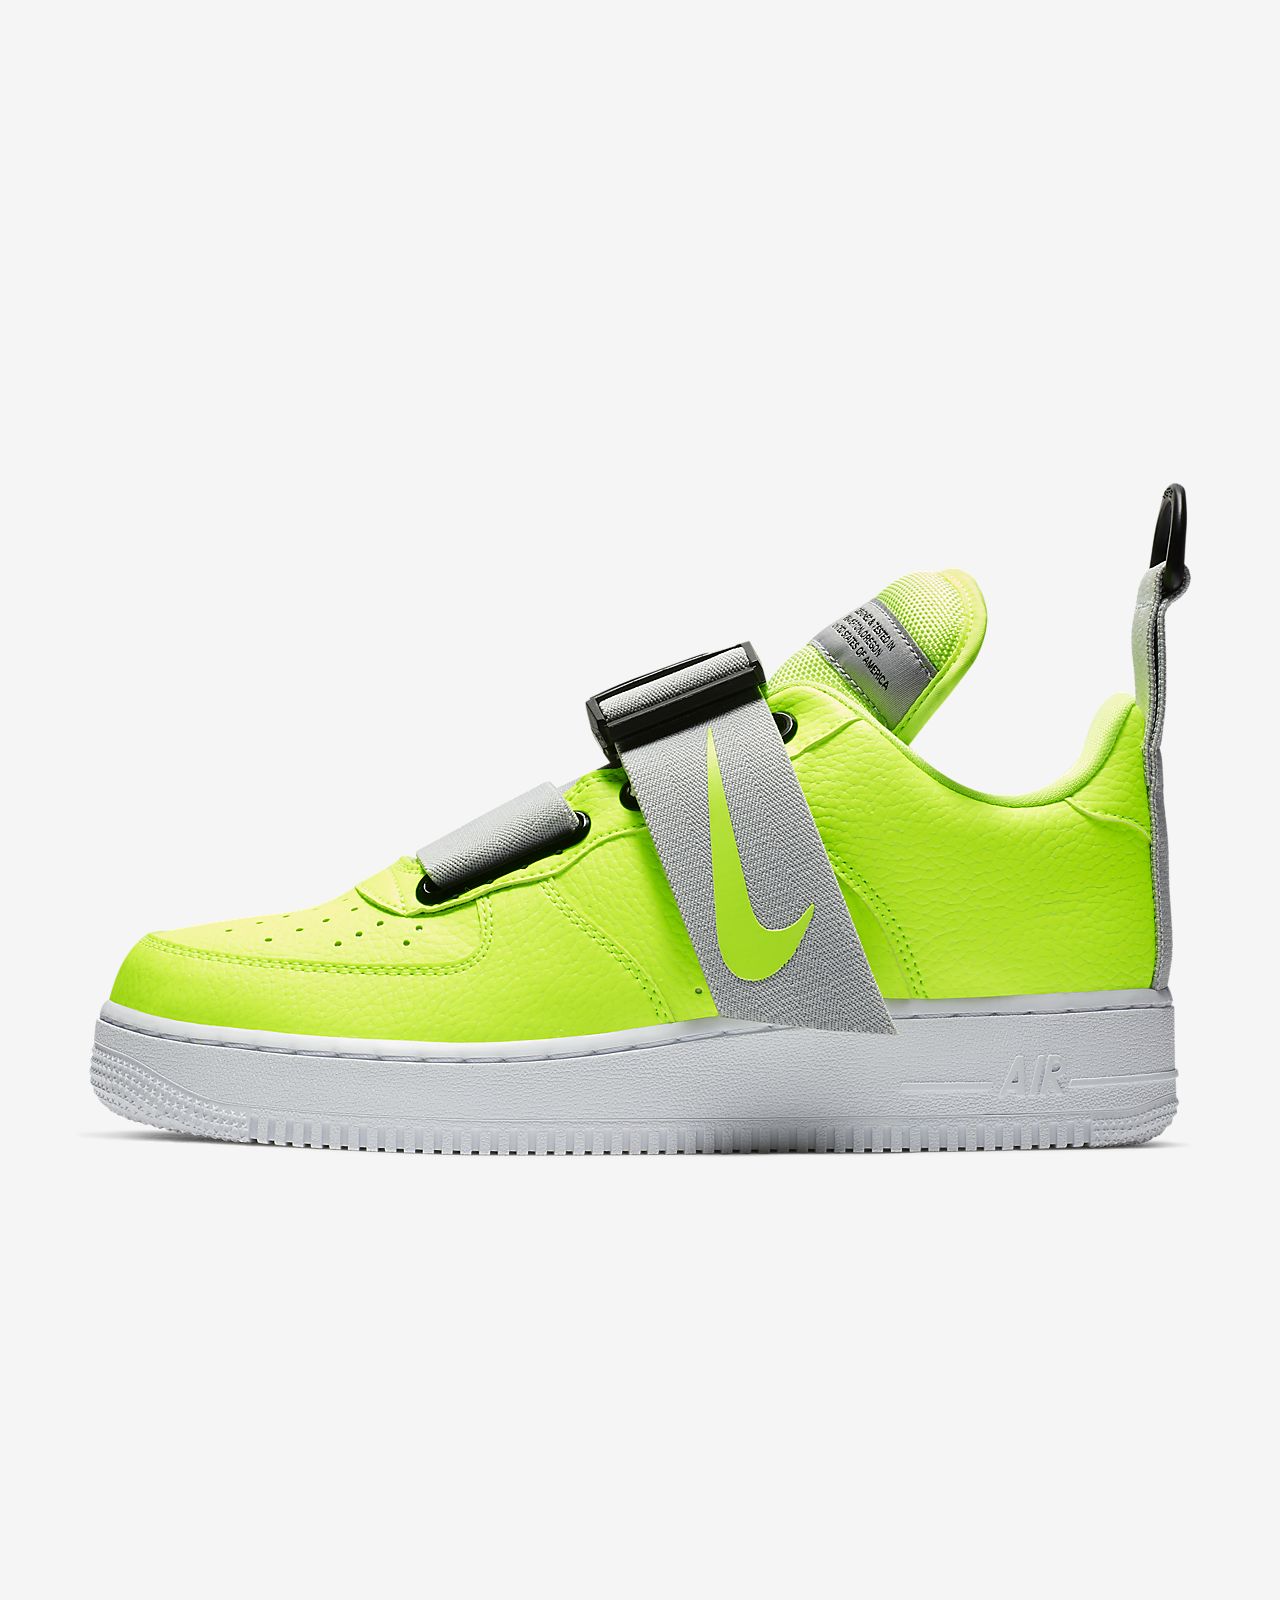 Nike air force 1 07 utility. Nike Air Force 1 Utility. Aj7747-700 Nike. Nike Air Force 1 Utility White Black. Nike Air Force 1 Low Utility 2.0.